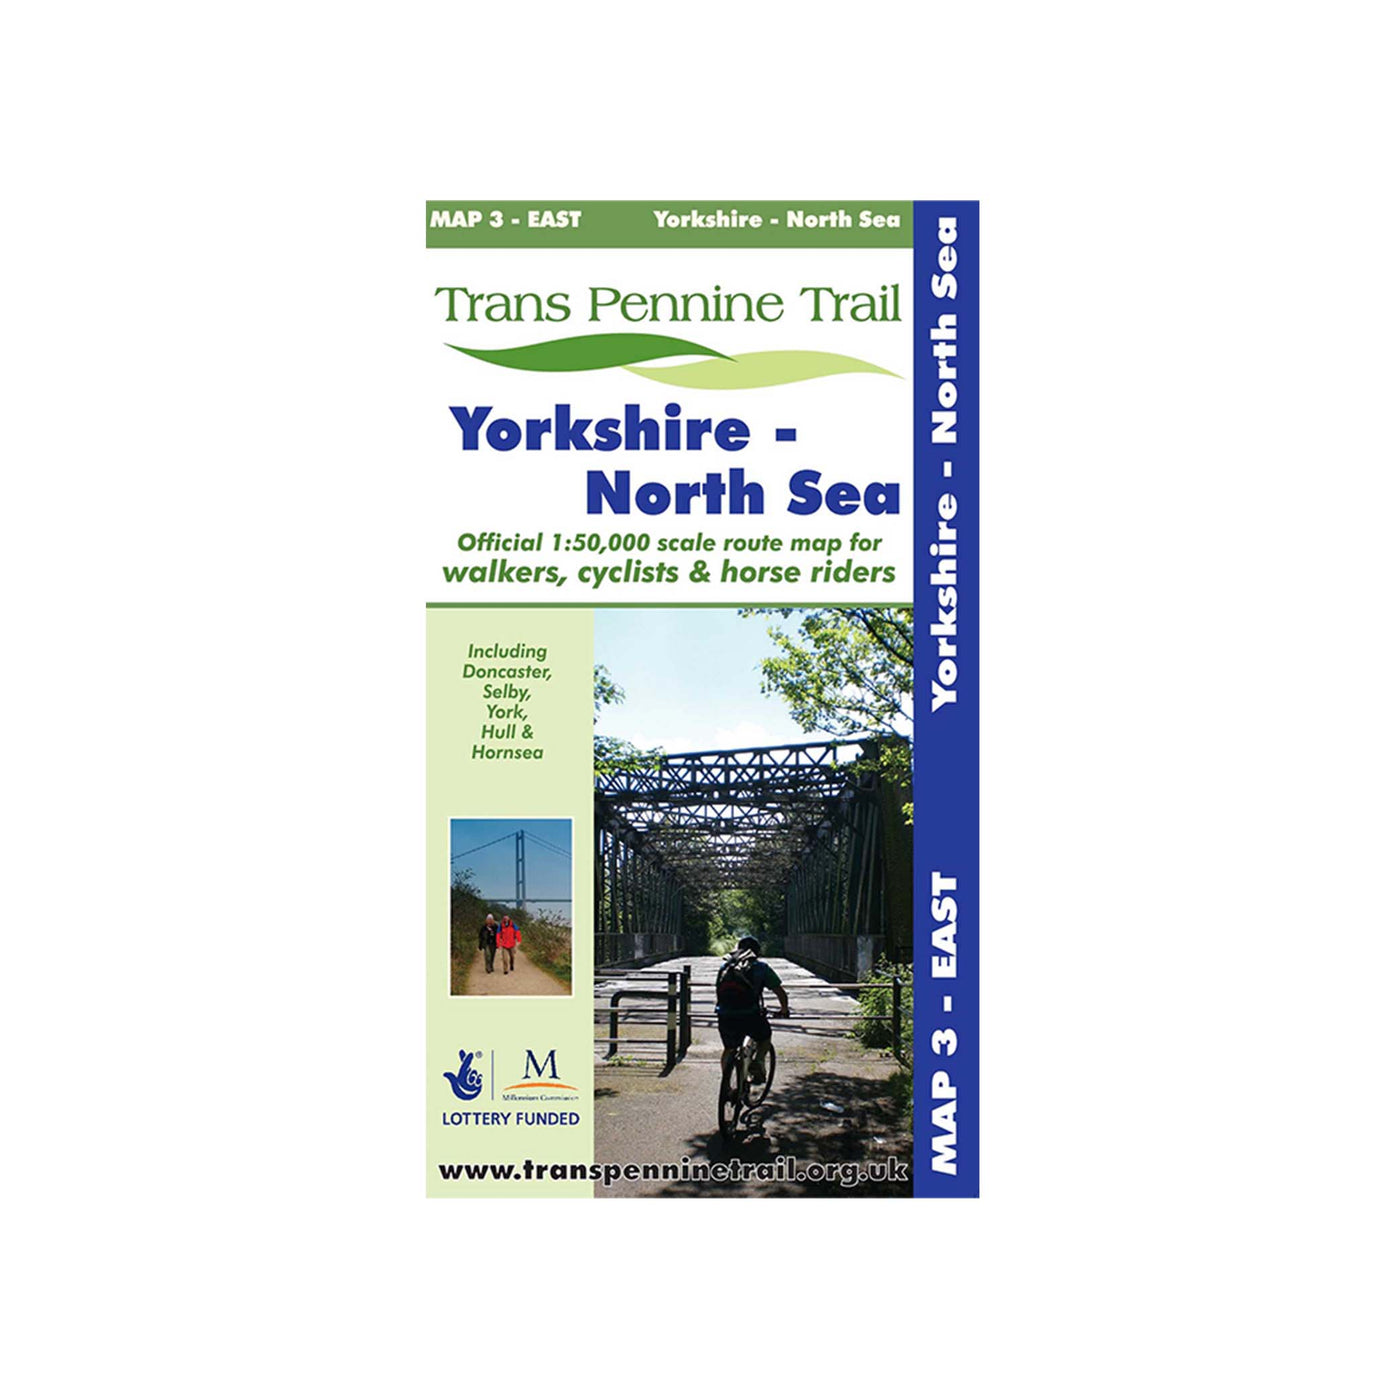 Trans Pennine Trail East Map 3 - Yorkshire to North Sea. Official route map for walkers, cyclists and horse riders. 